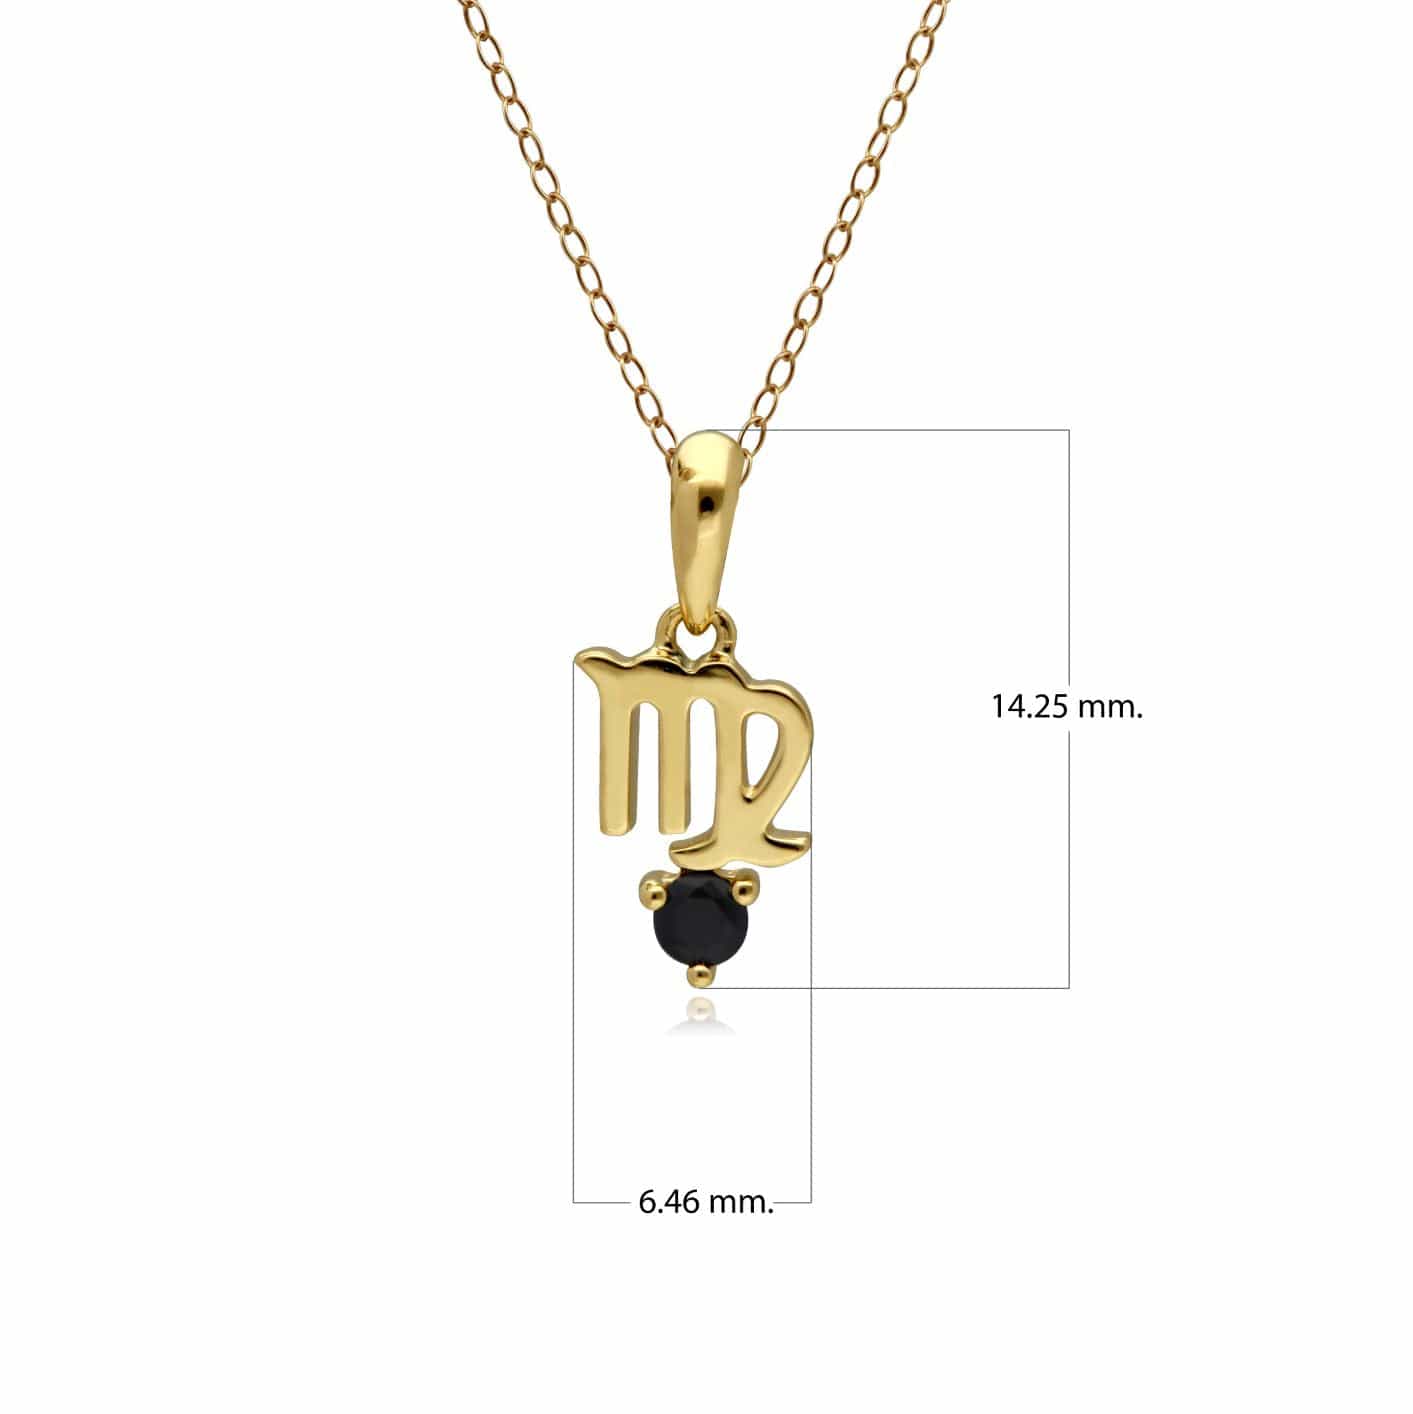 135P2000019 Sapphire Virgo Zodiac Charm Necklace in 9ct Yellow Gold 2